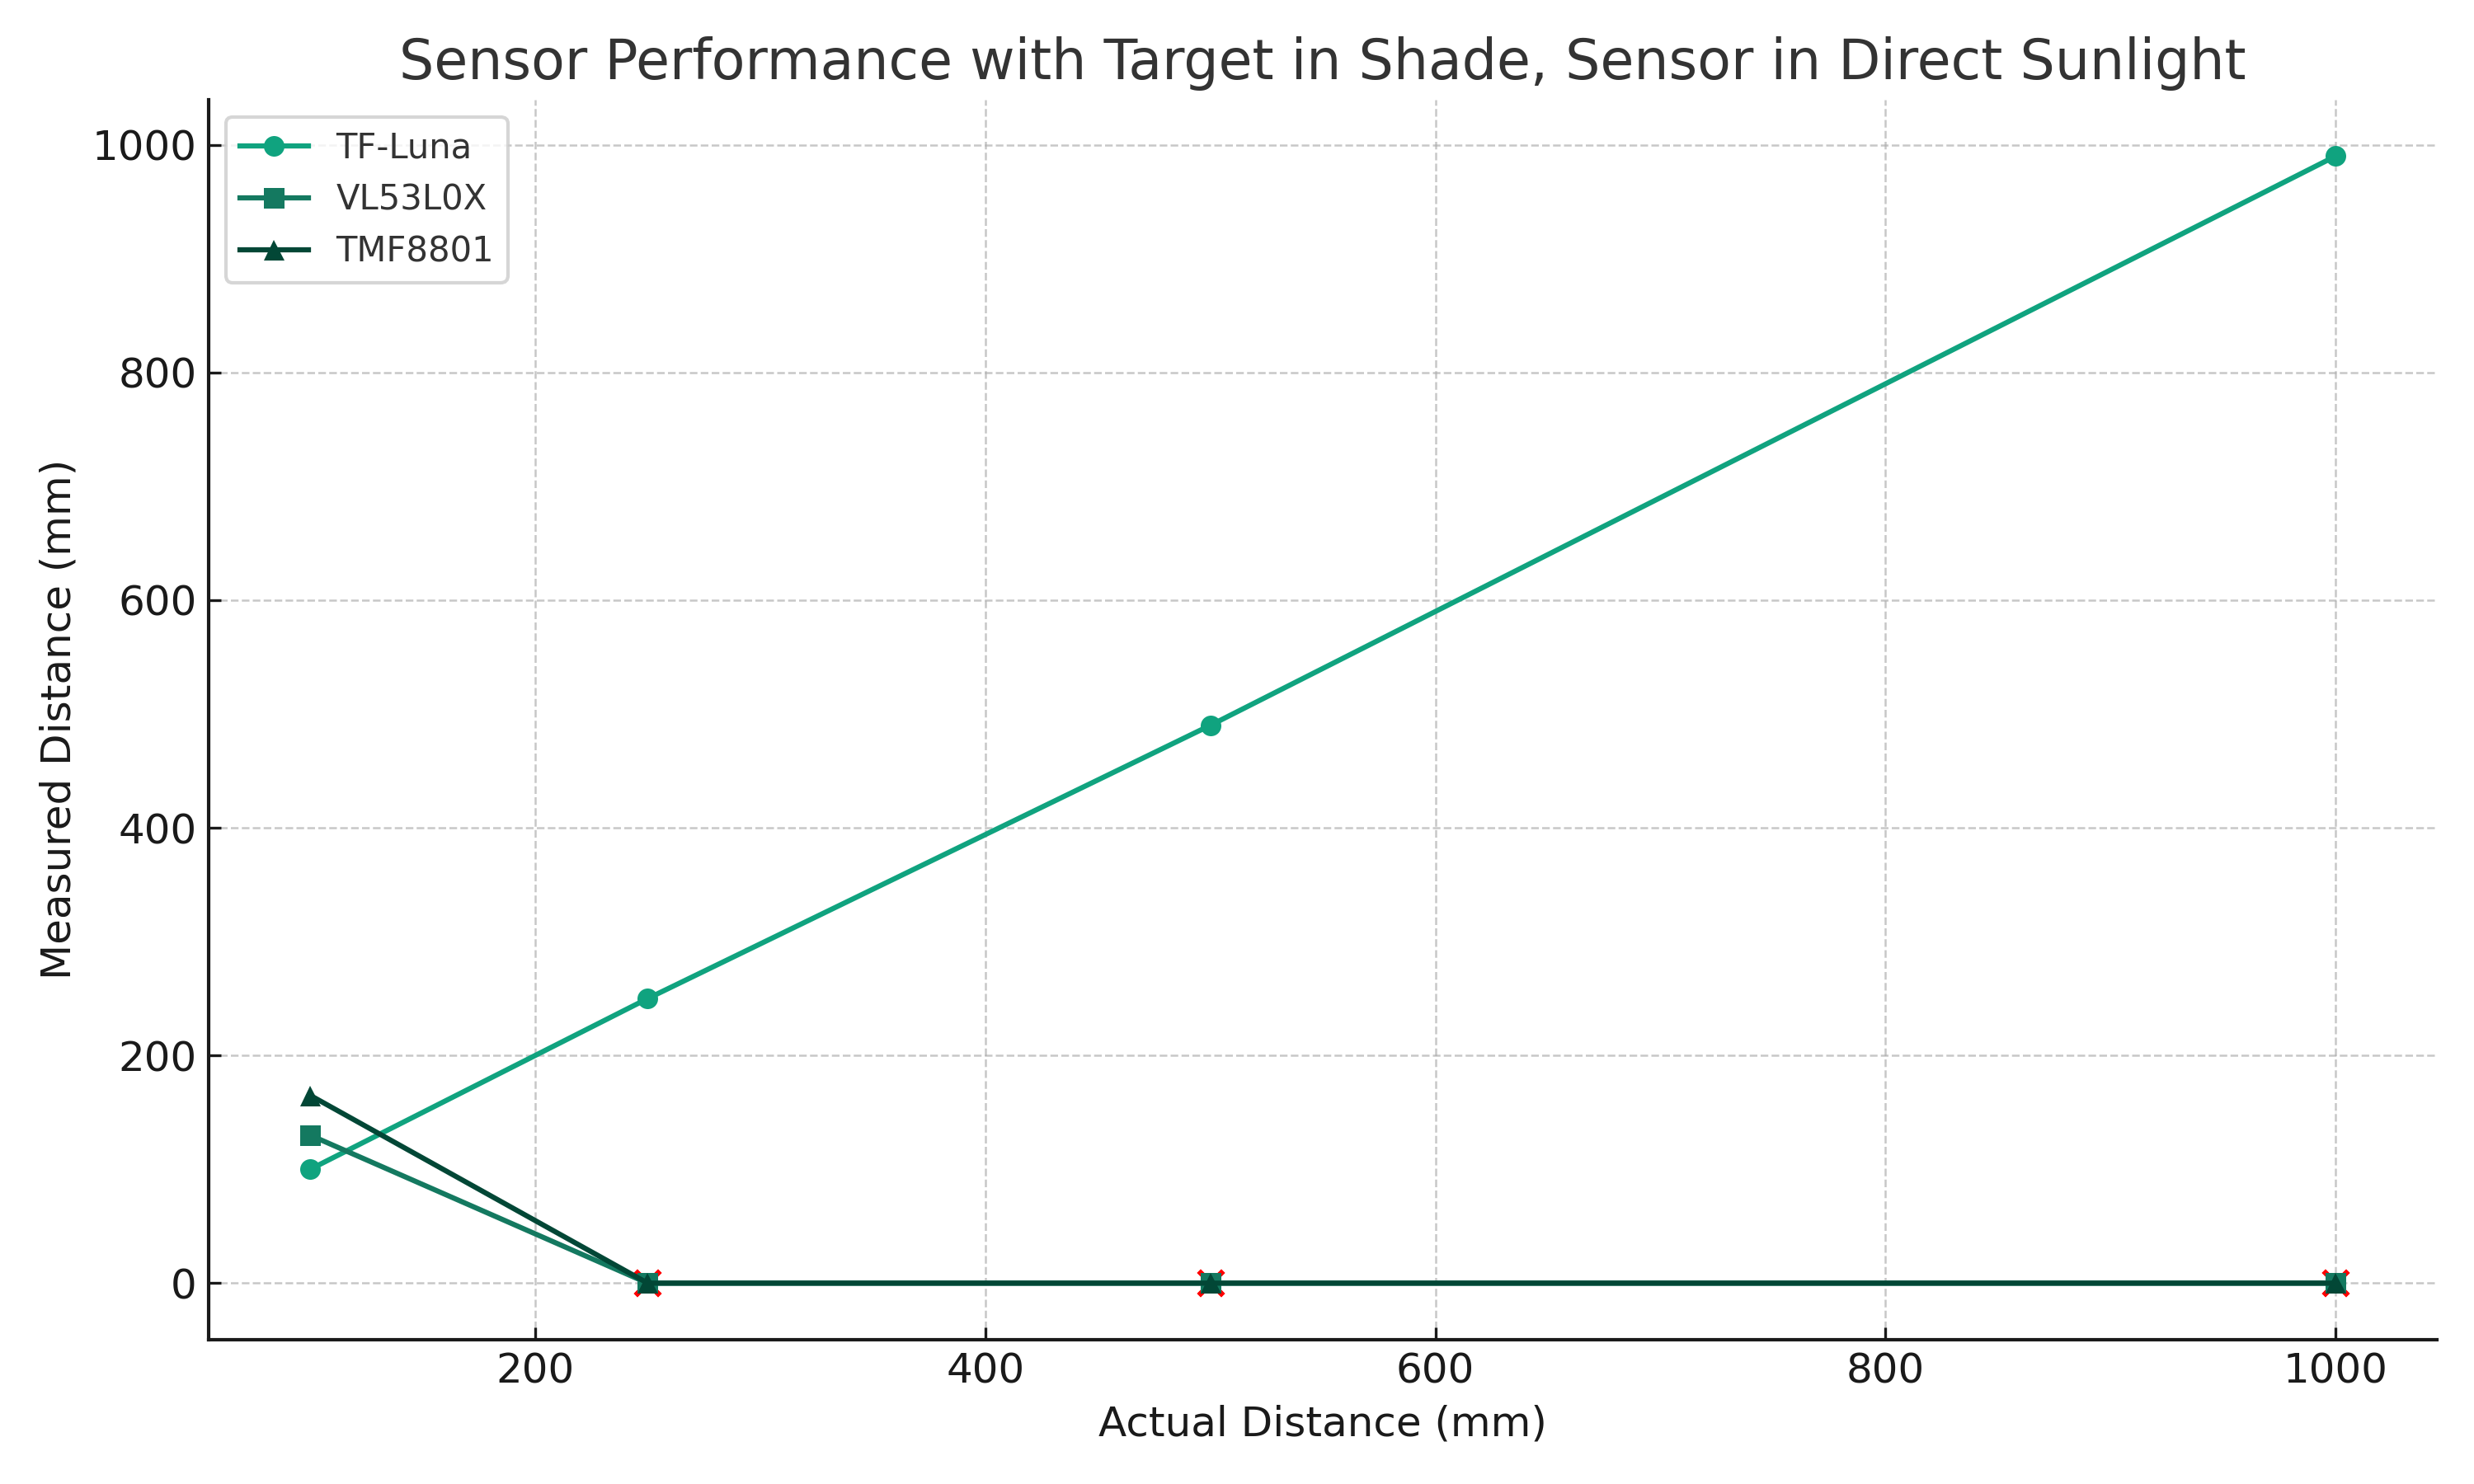 “chart showing results for target in shade, sensor in direct sunlight”